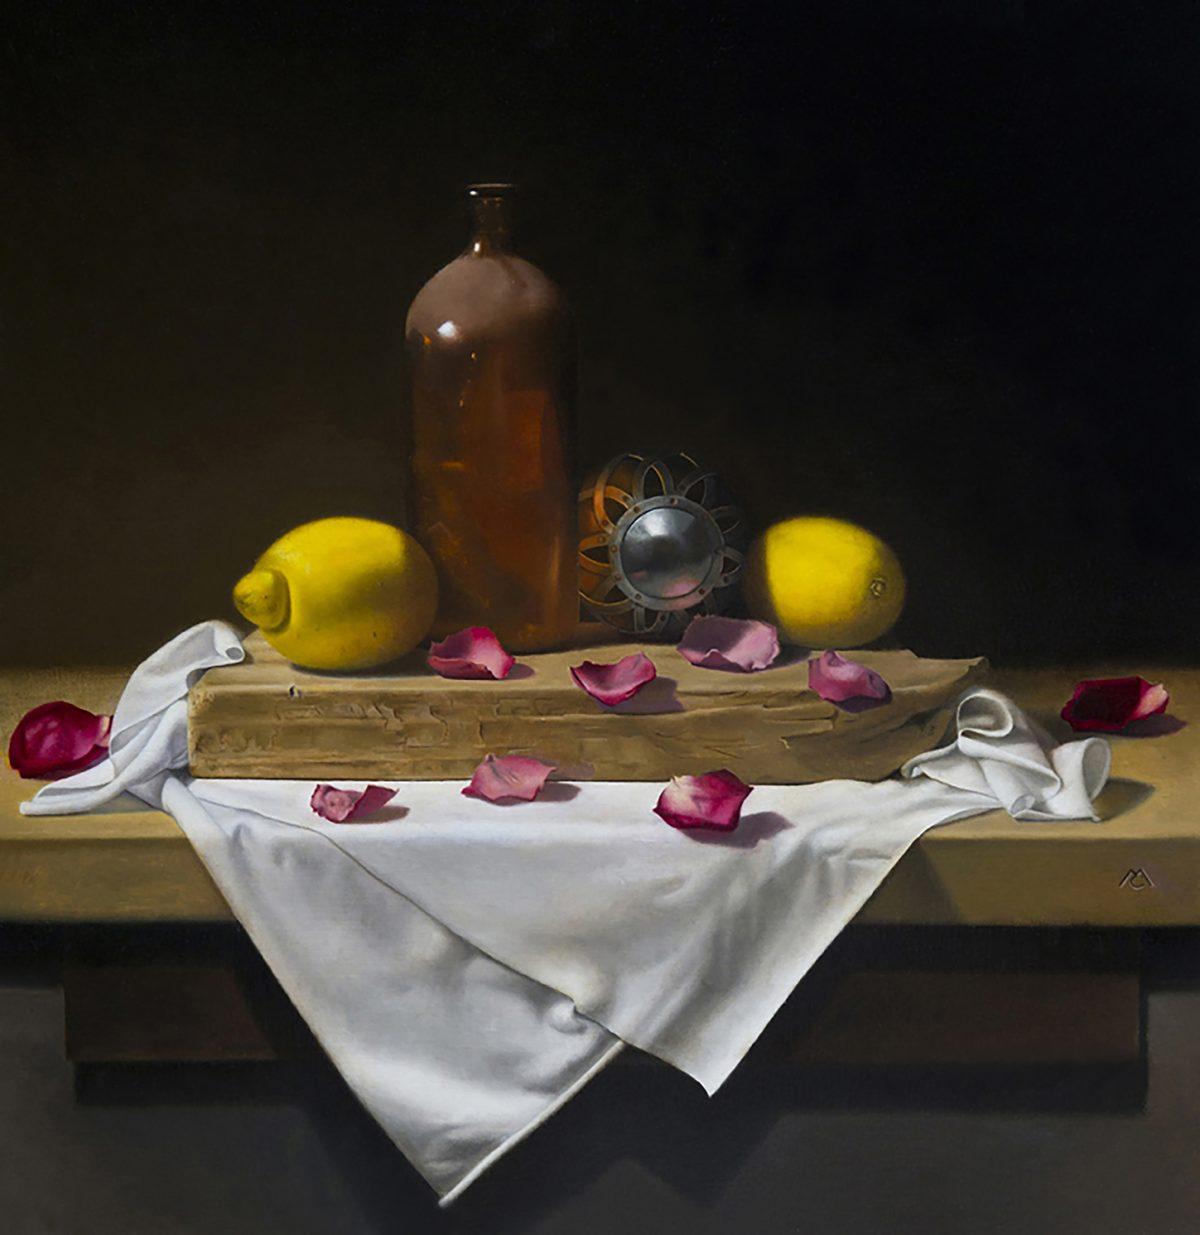  "Composition with Brown Bottle" by Carlos Madrid. Oil on linen, 24 inches by 24 inches. (Courtesy of Carlos Madrid)